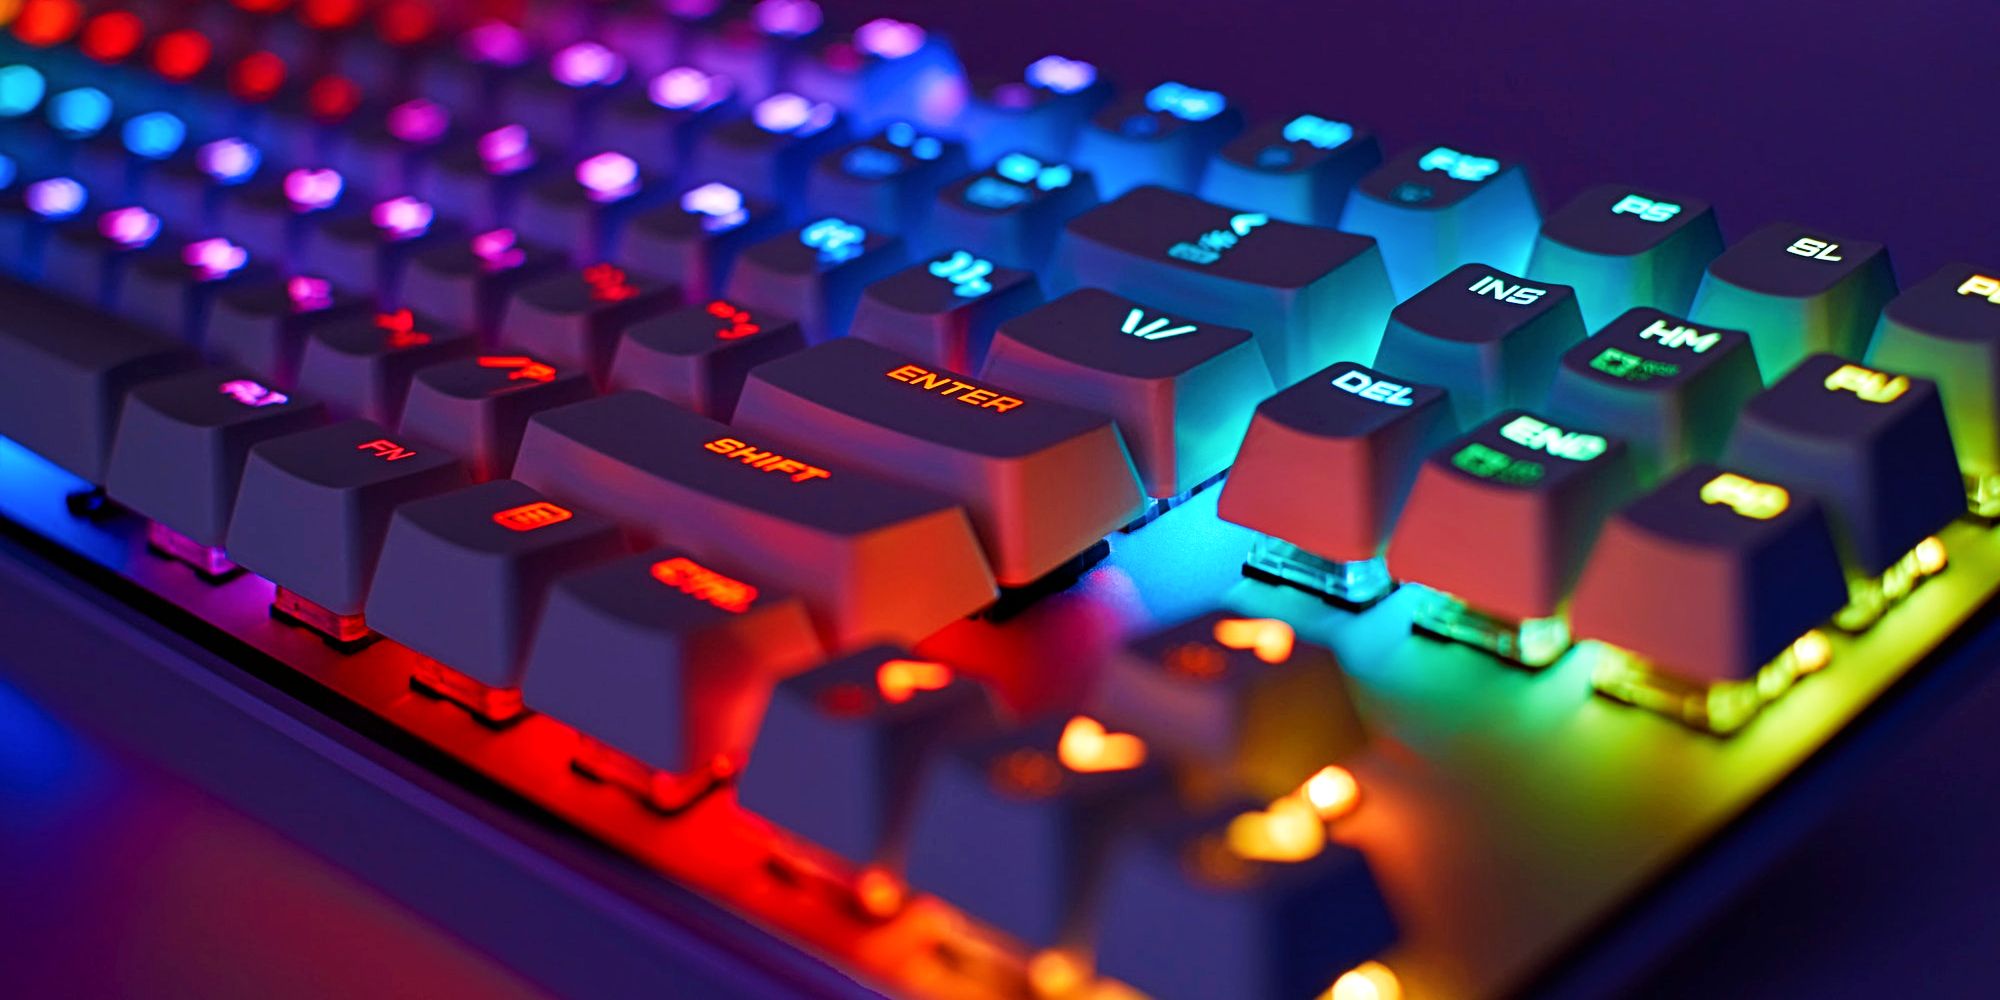 Picture of an RGB mechanical keyboard.